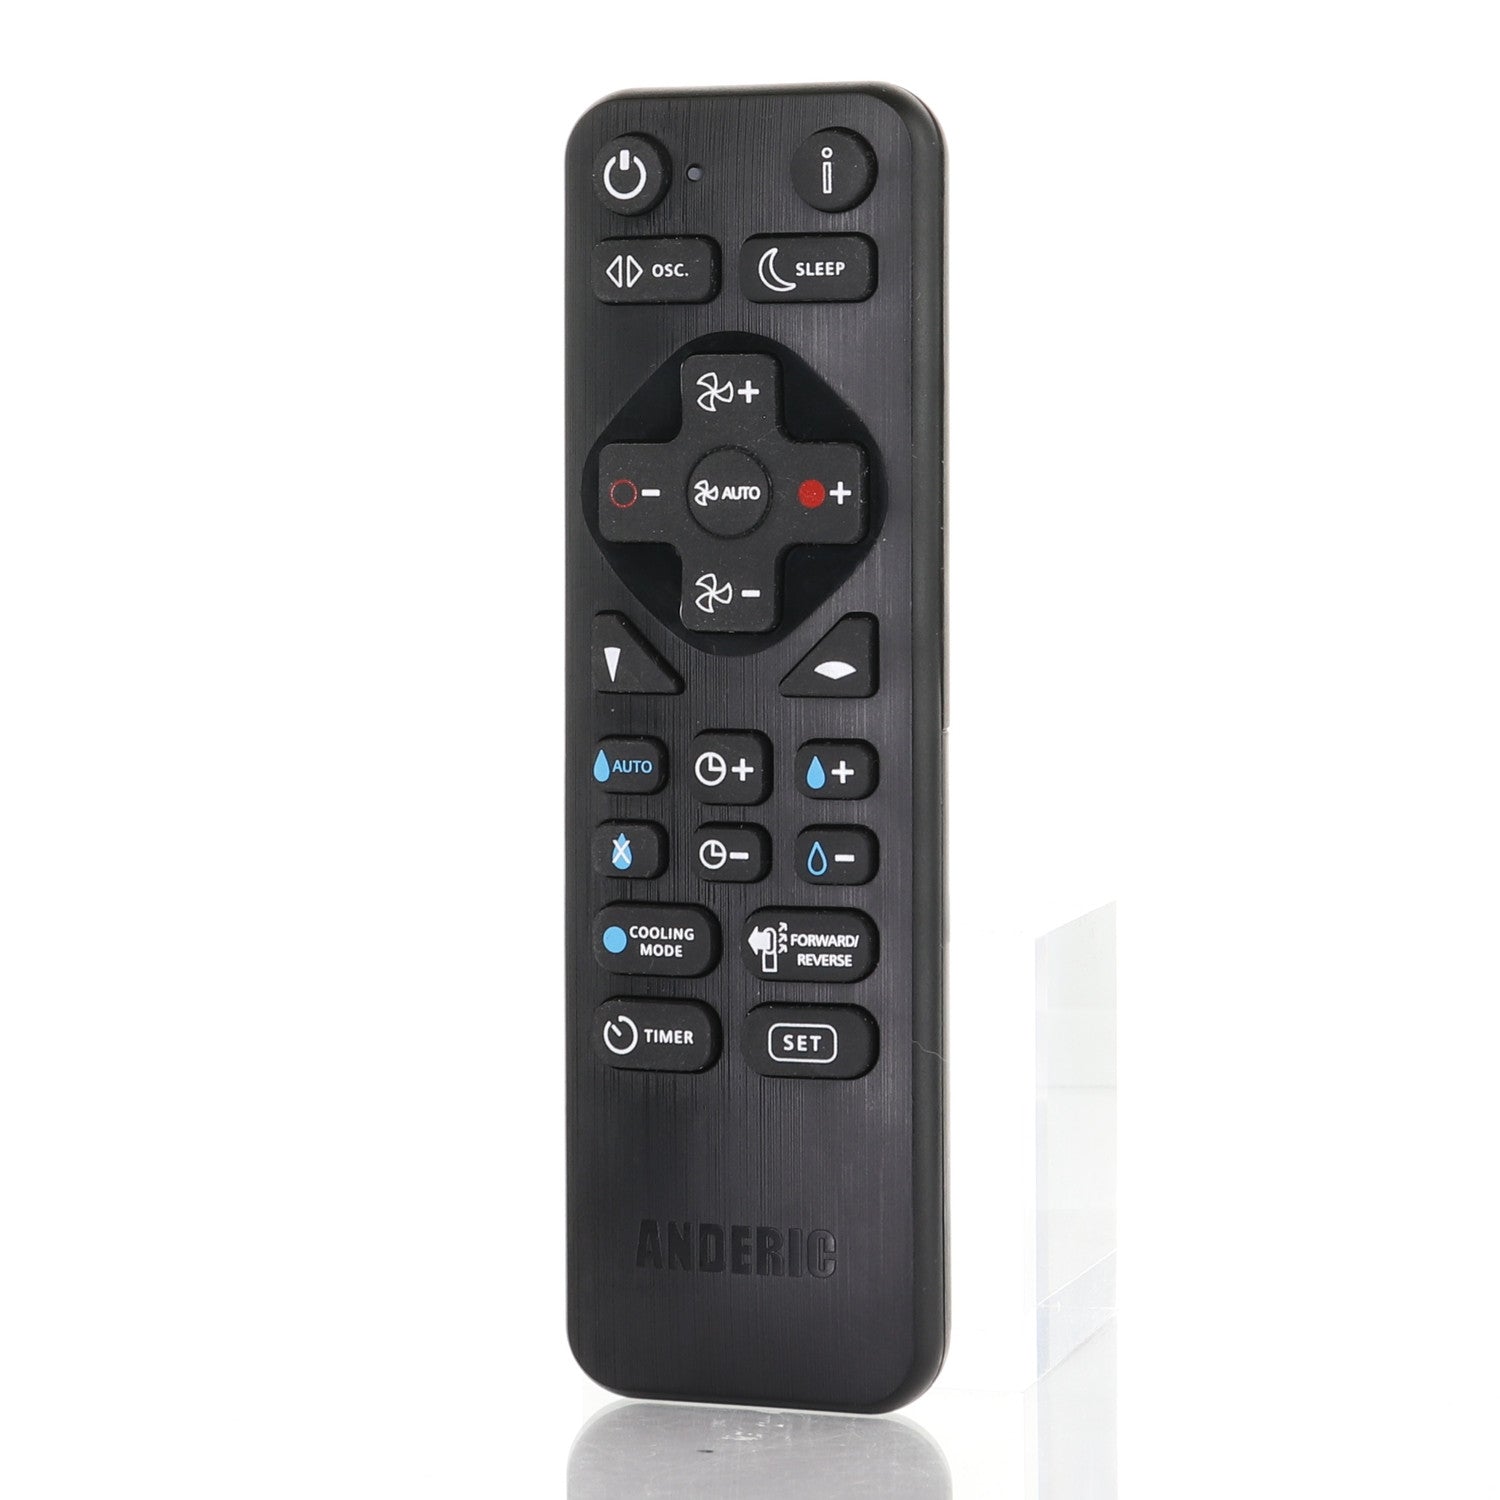 RRDYS01.2 Universal Remote Control for Dyson® Pedestal Floor Fans, Heaters, Humidifiers, and Purifiers with Learning